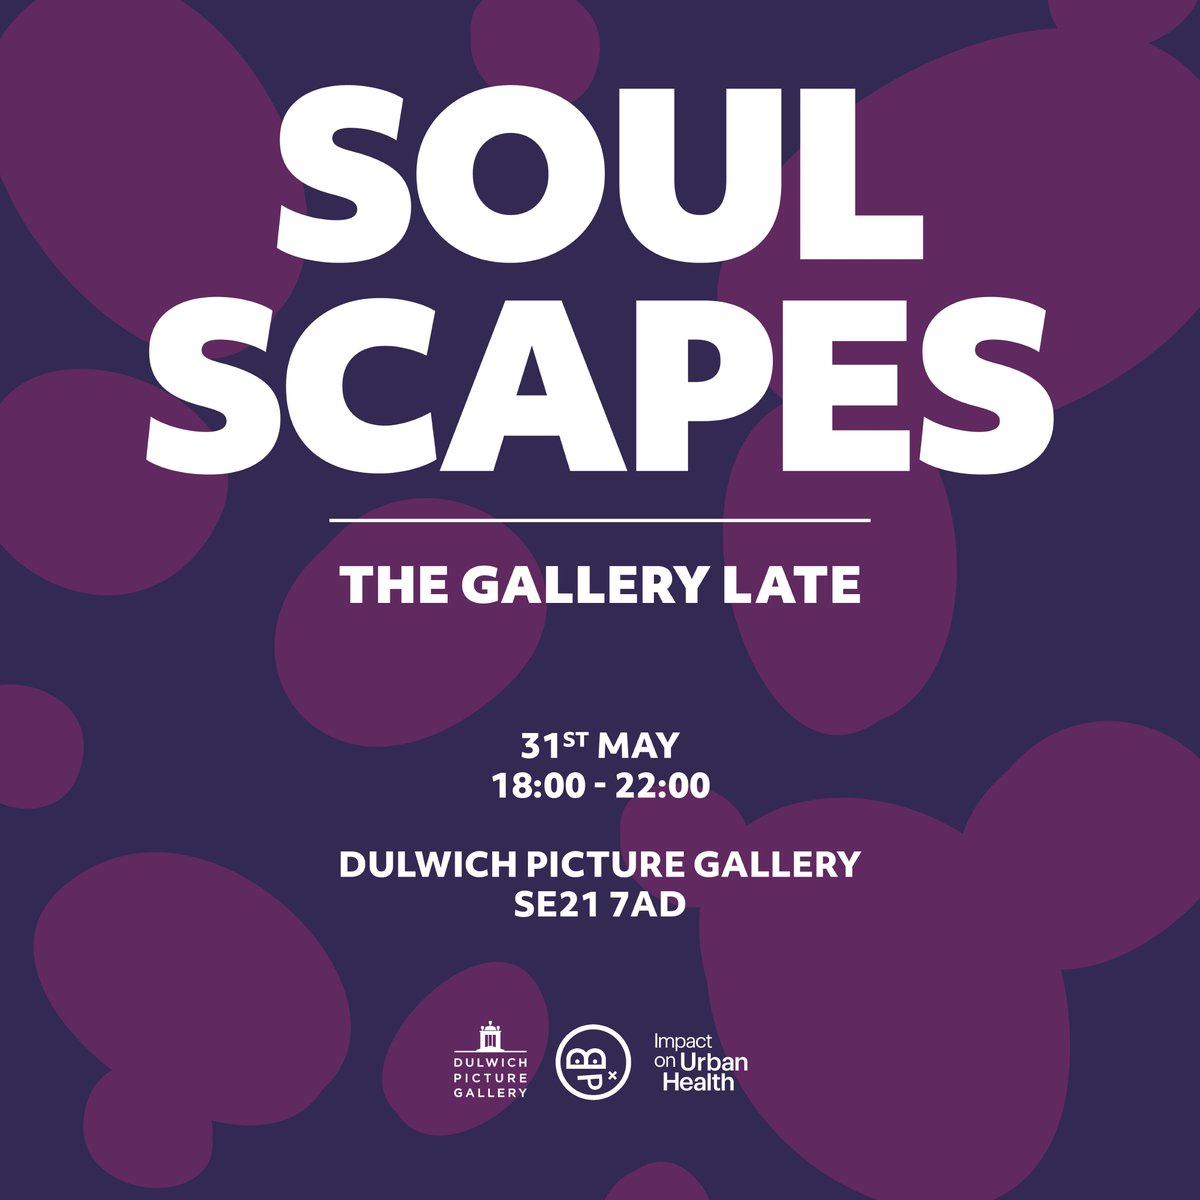 The Brixton Project & @DulwichGallery present Soulscapes Late🍃🌙 Explore foraging workshops, music, dance, soundscapes, food & more, reflecting on belonging, memory, joy, & transformation. 📅 Fri 31 May, 6-10PM 📍Dulwich Picture Gallery 🔗FREE Tickets dulwichpicturegallery.org.uk/whats-on/after…